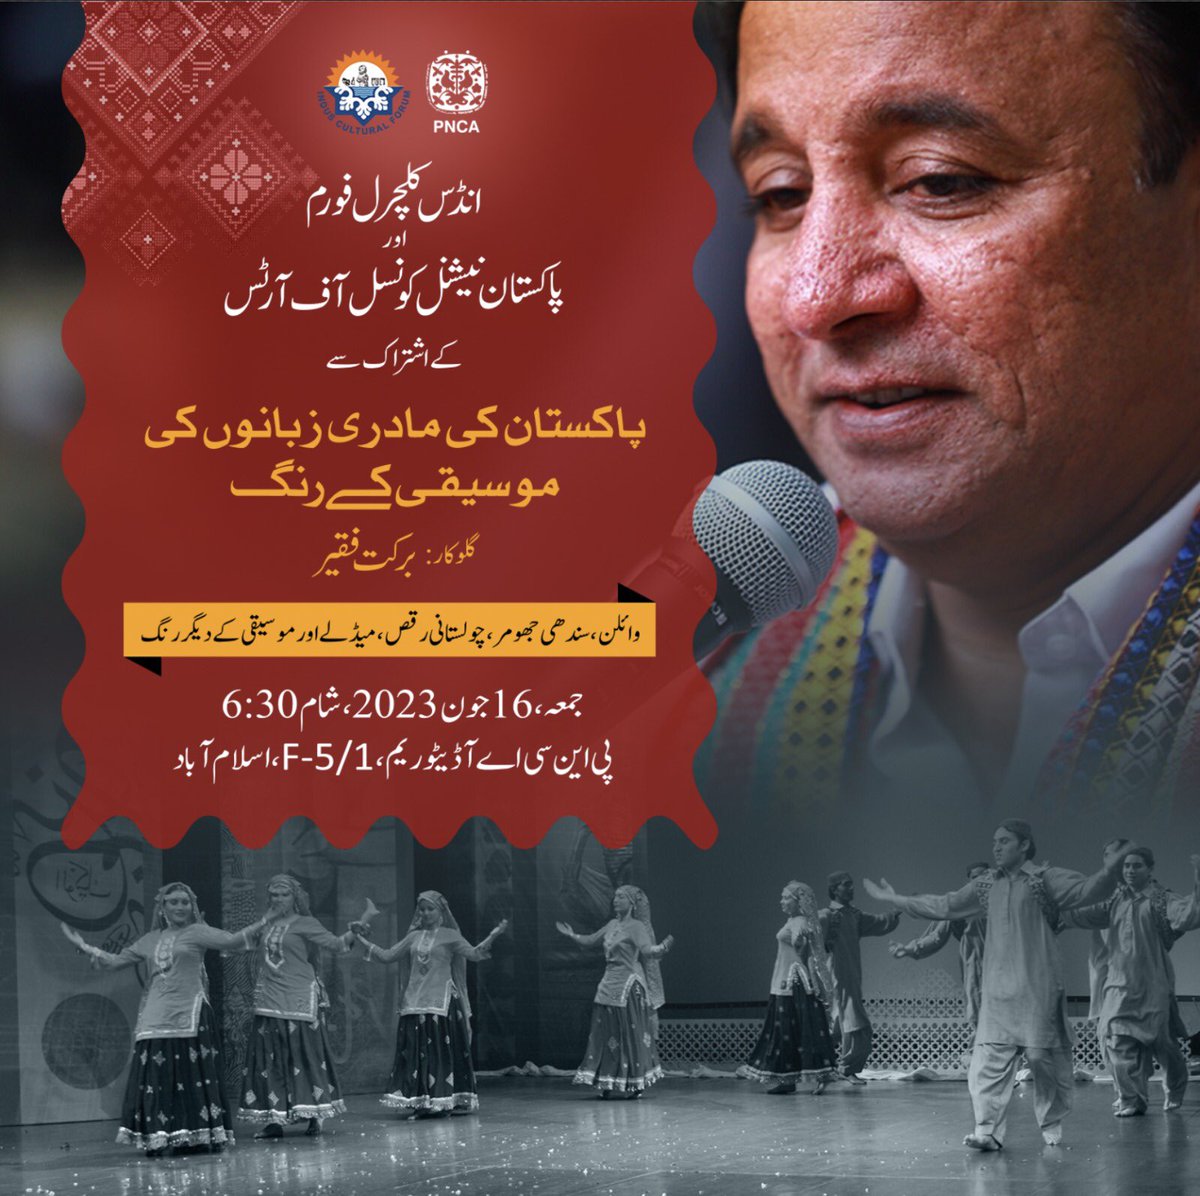 Join in friends on 16 June Friday to enjoy the colours of #MotherLanguages of #Pakistan. Entry is absolutely open to all and free! #indusculturalforum #PNCA @pkBritish @EUPakistan @UnescoPakistan @dawn_com @geonews_urdu @thenews_intl @jang_akhbar @ZarrarKhuhro